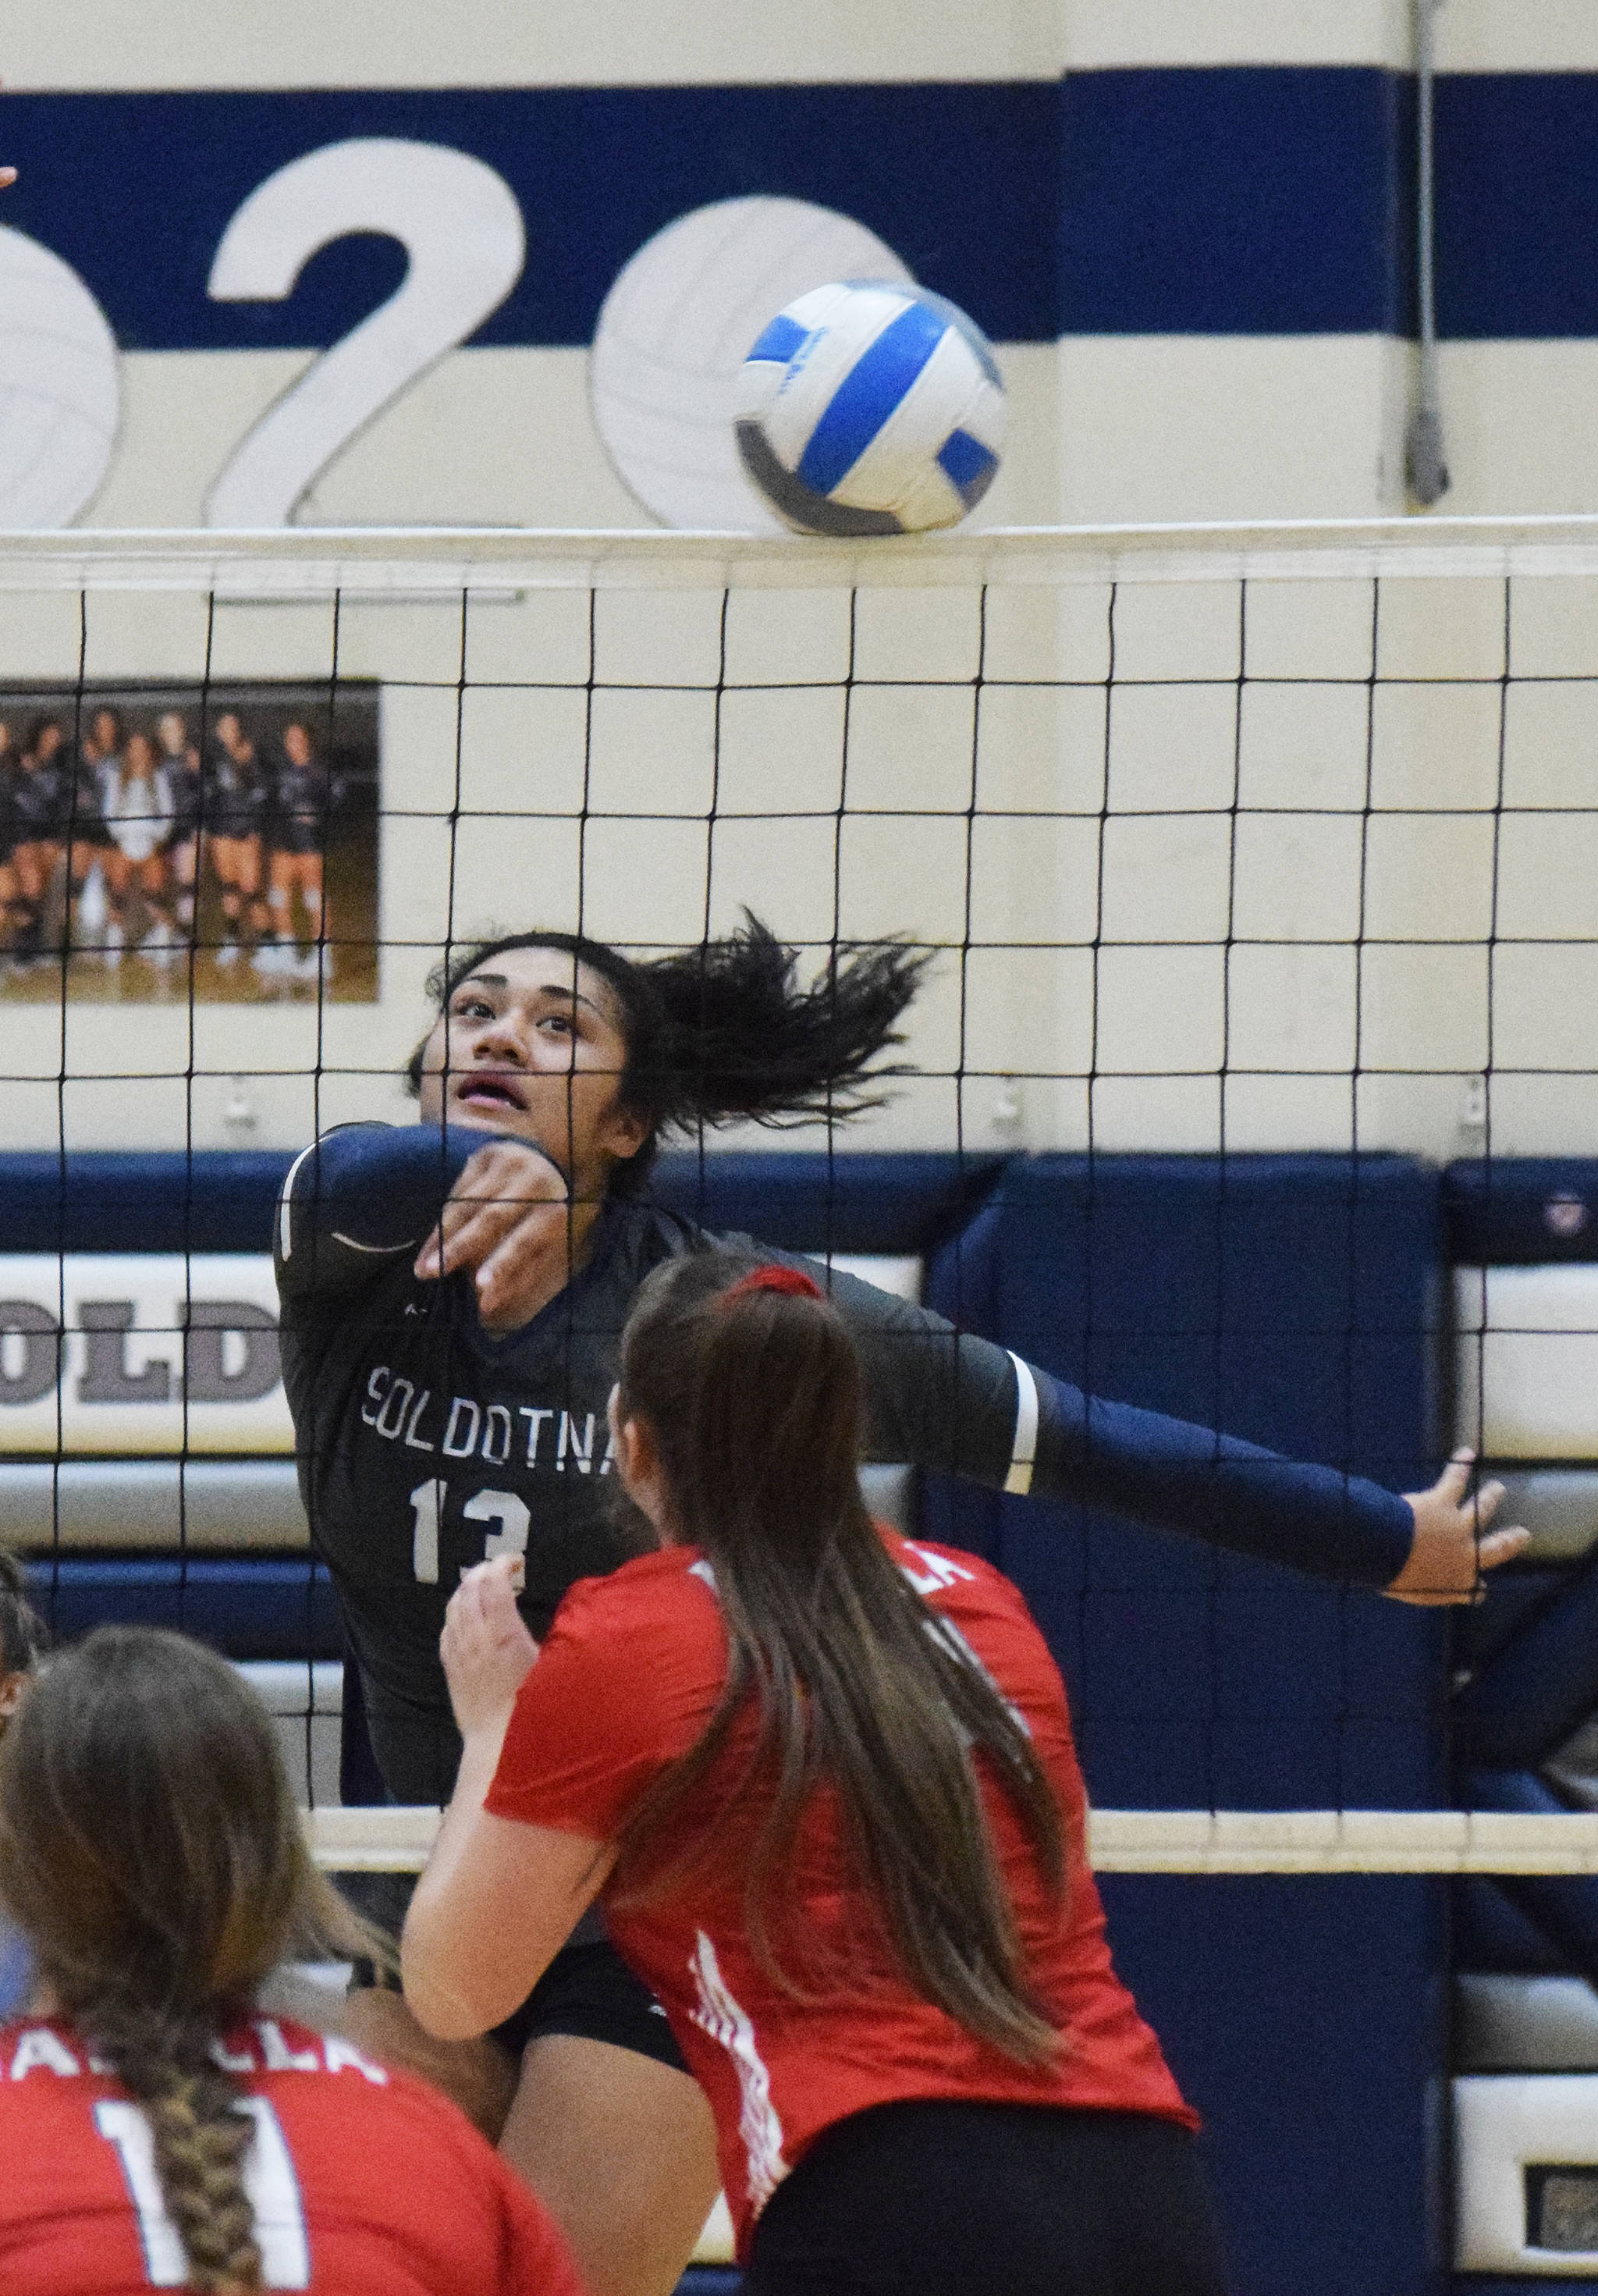 Soldotna’s Ituau Tuisaula sends a shot over the net Thursday, Nov. 7, 2019, against Wasilla at the Northern Lights Conference tournament at Soldotna High School in Soldotna, Alaska. (Photo by Joey Klecka/Peninsula Clarion)